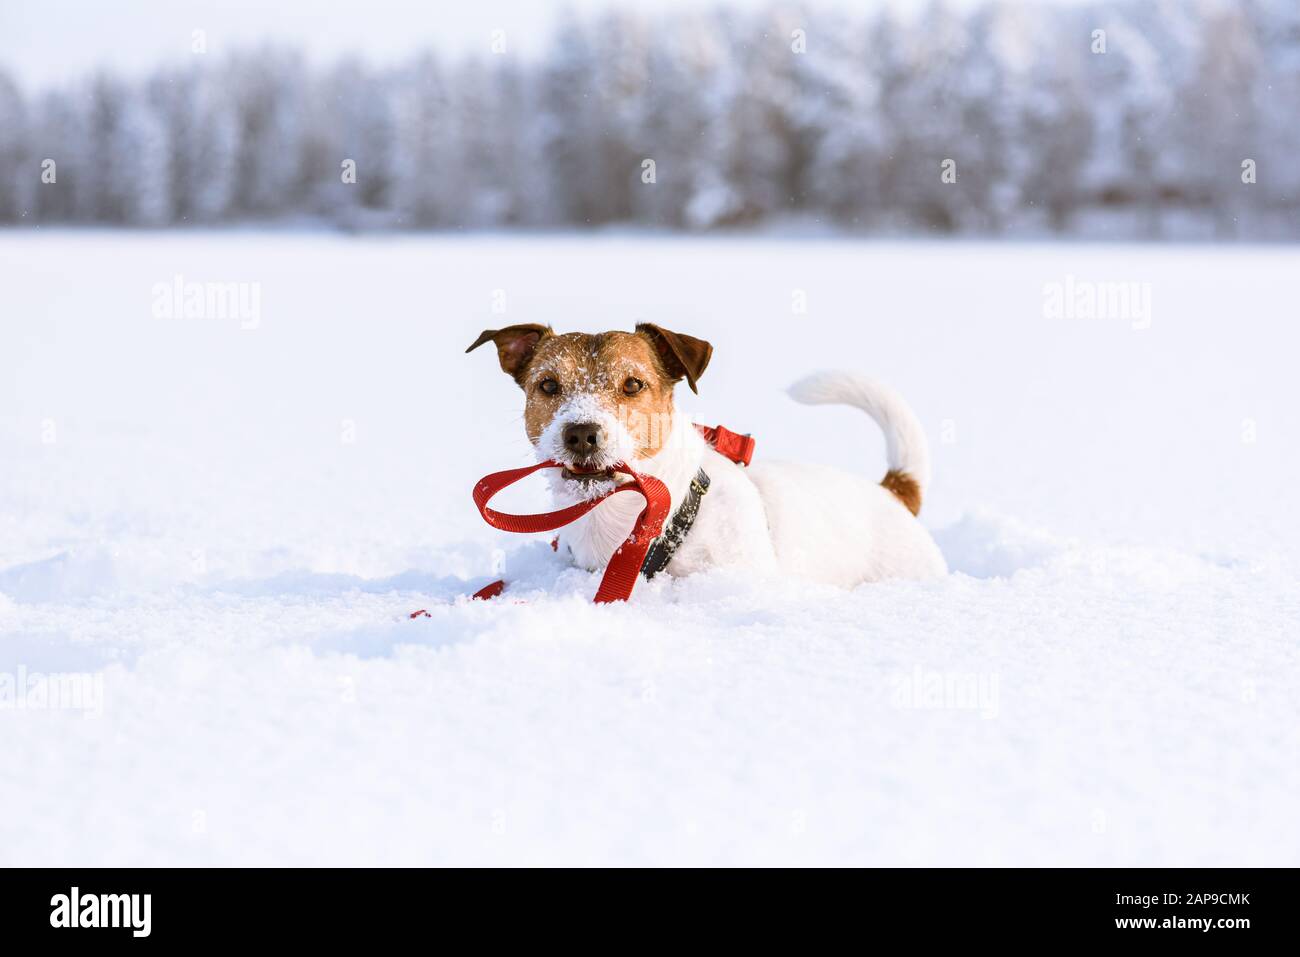 Winter fun and outdoor pursuit with pet concept - dog holding in mouth its own leash lying on snow Stock Photo